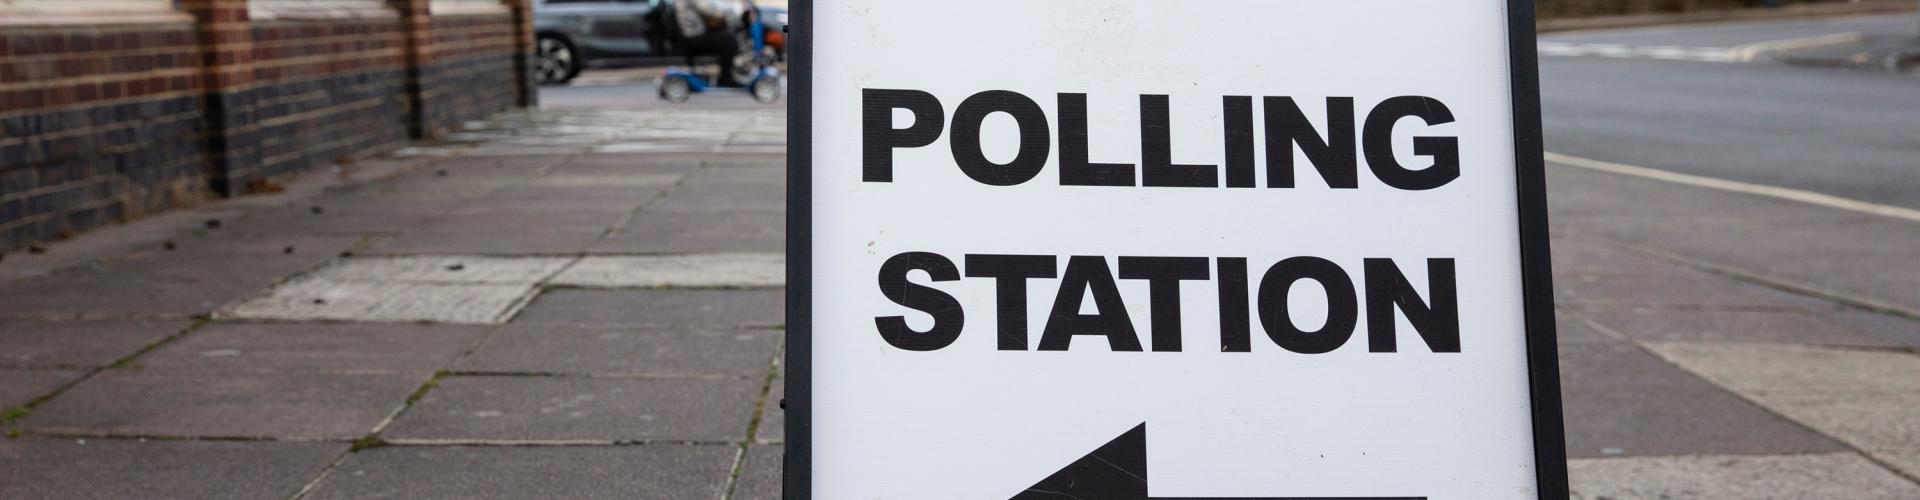 Polling station sign on ground